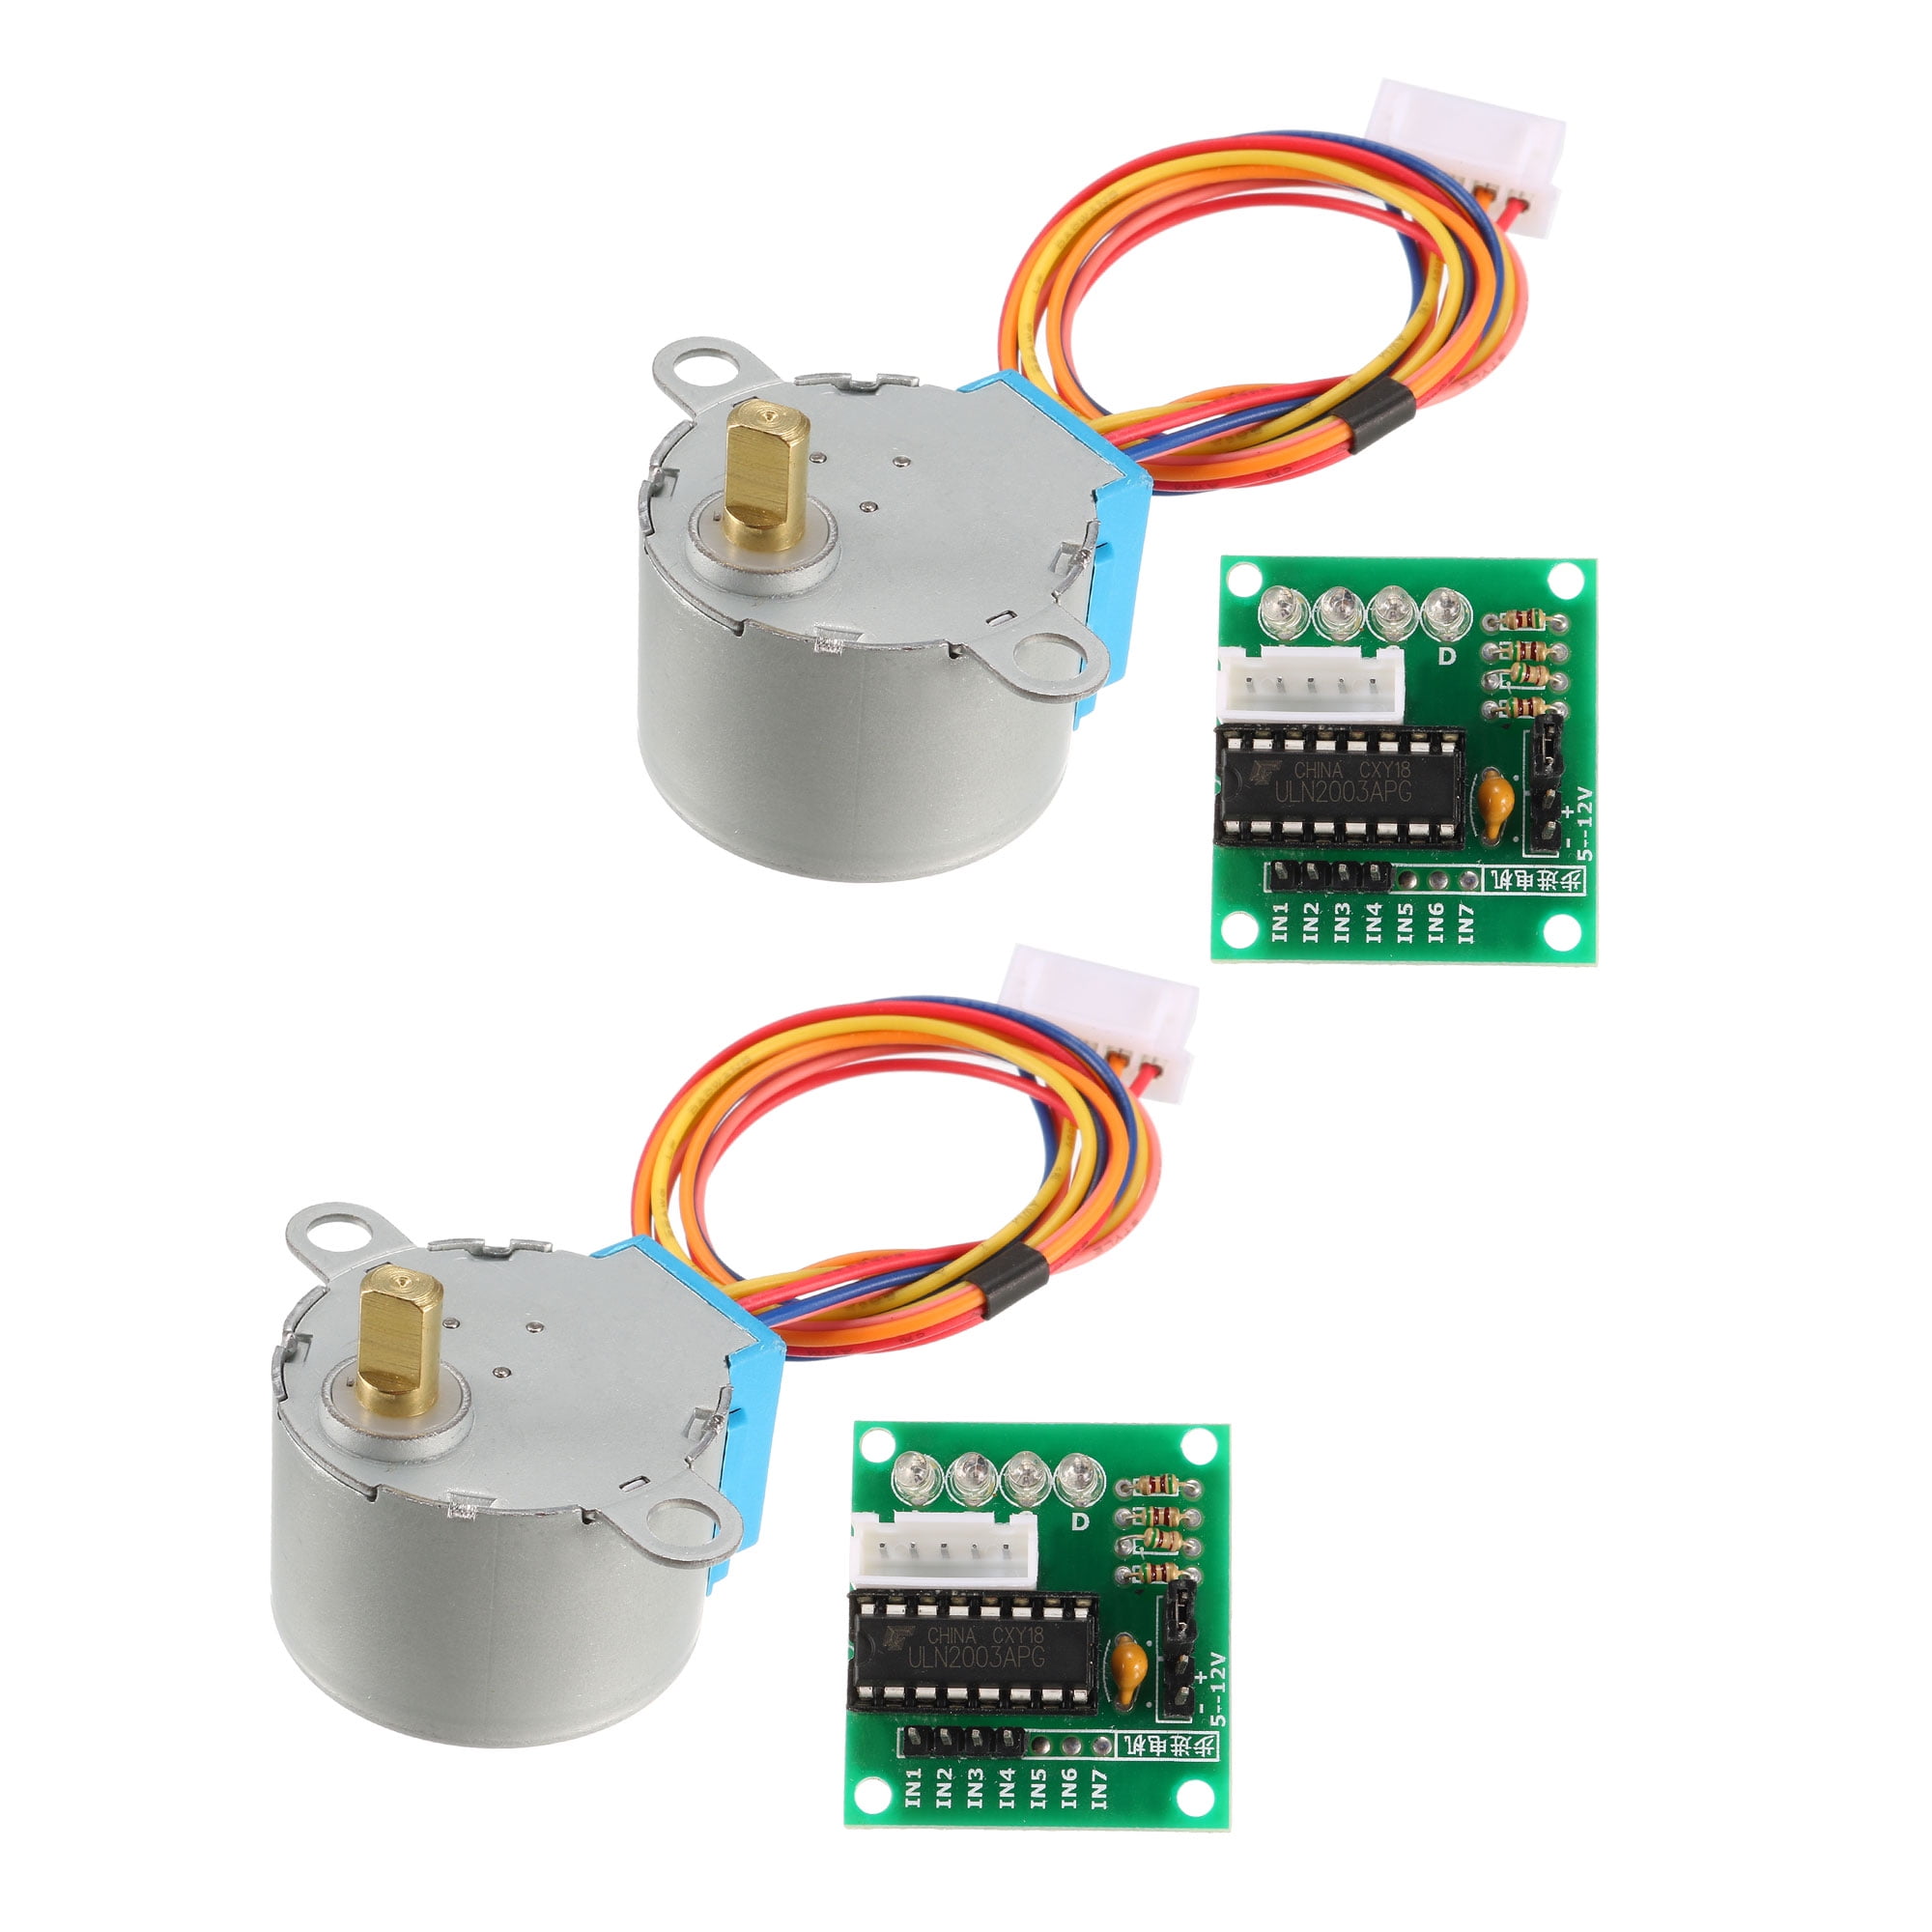 2pc5V Stepper Motor 28BYJ-48 With Drive Test Module Board ULN2003 5 Line 4 Phase 